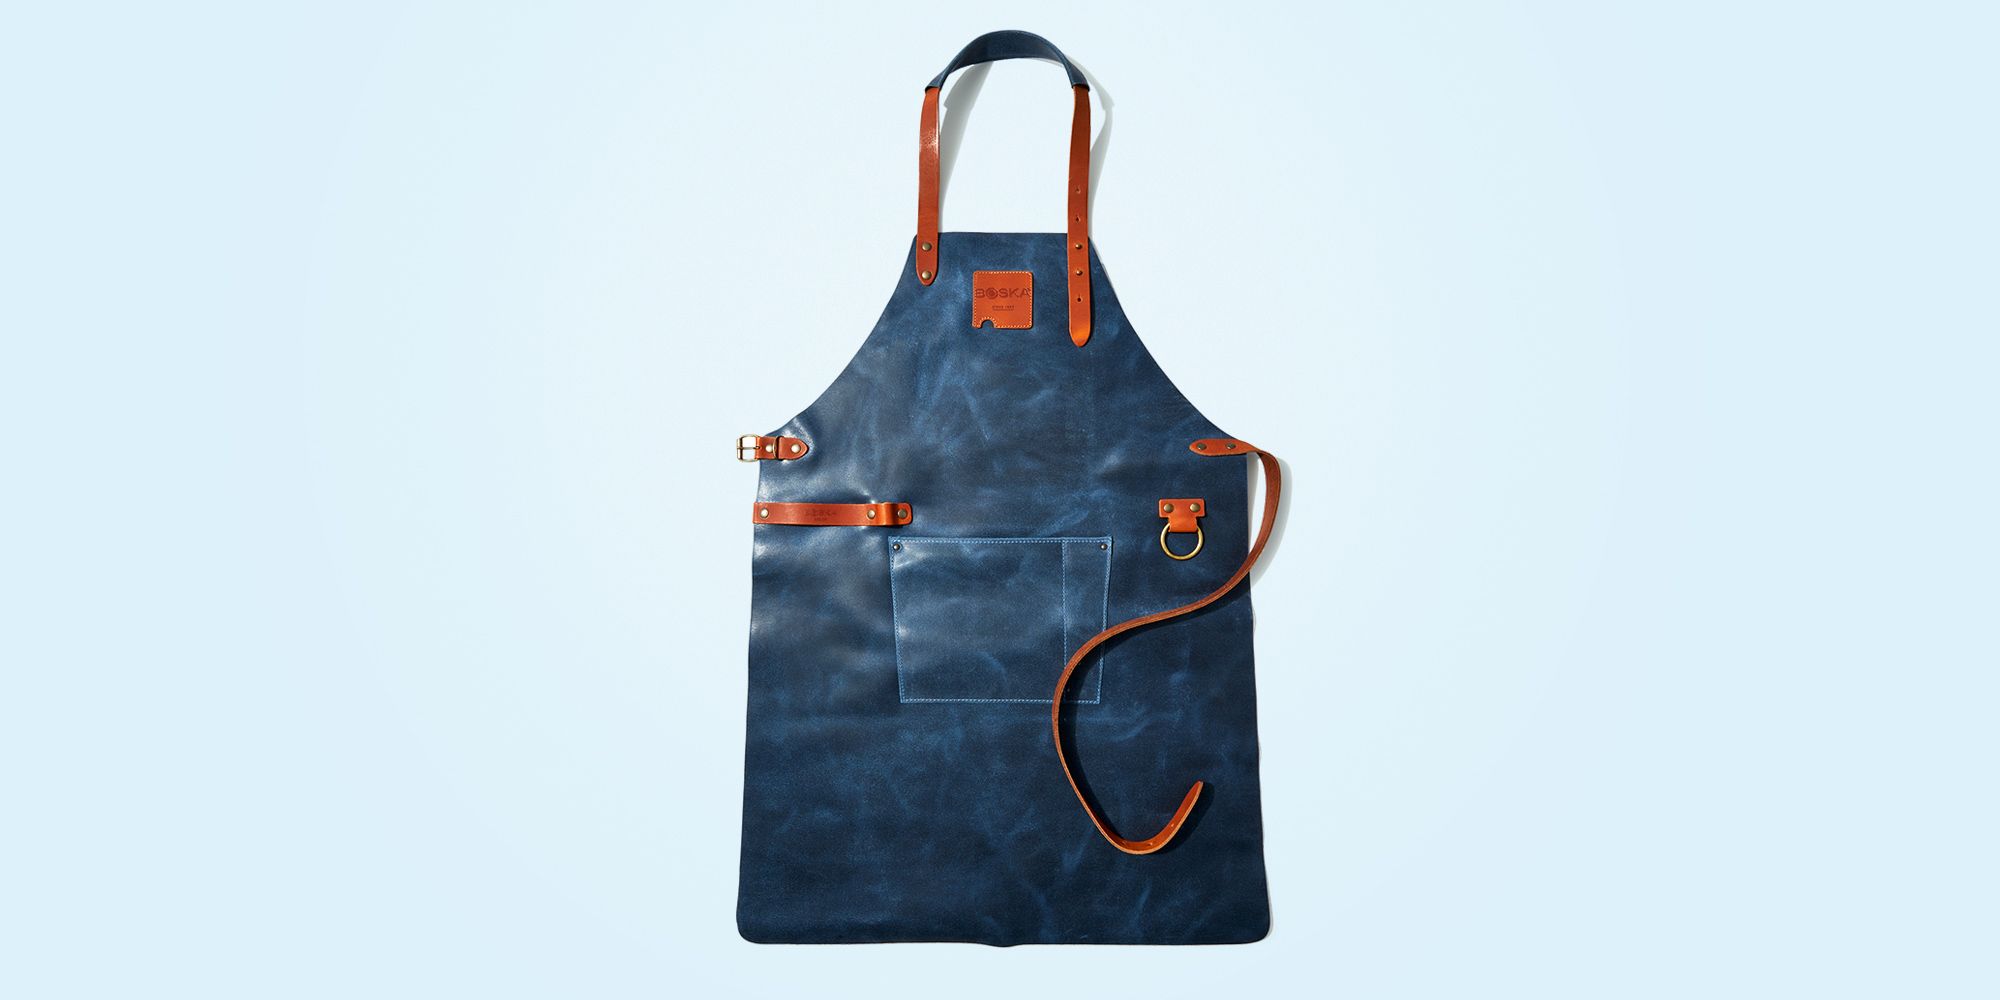 Custom Apron with Leather Straps and Pocket  olpr USA